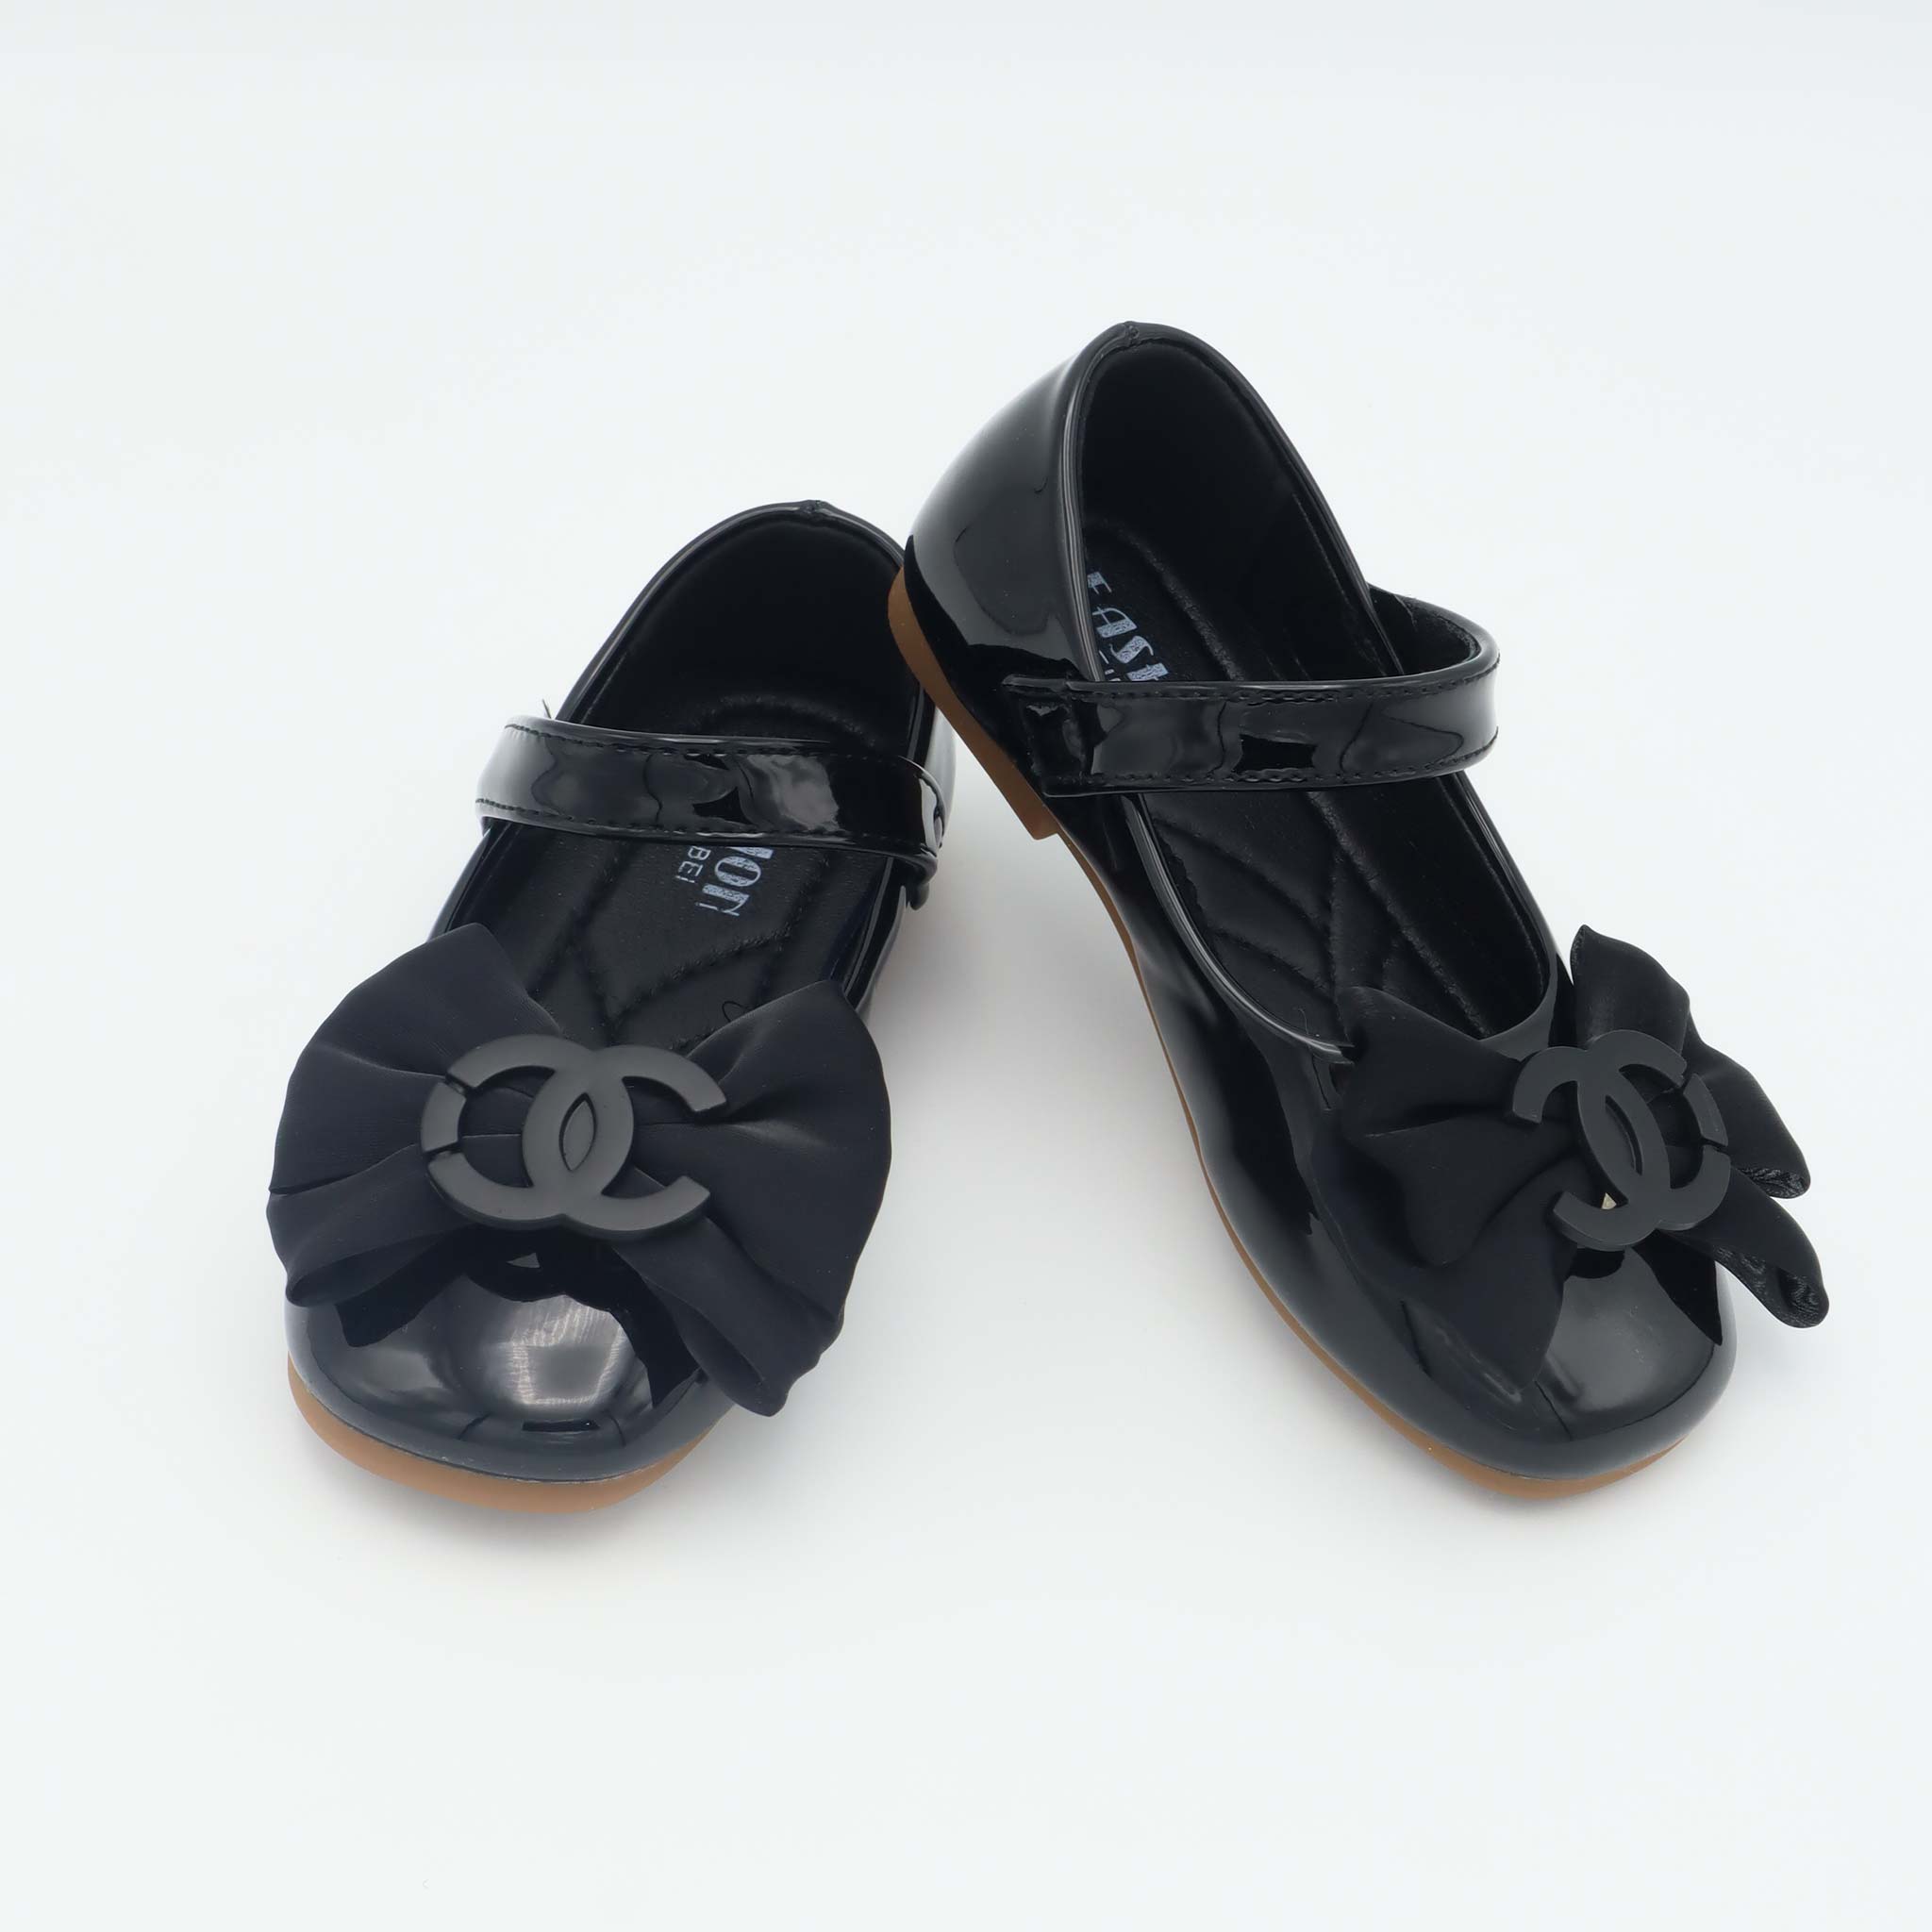 Baby Pumpy Shoes Black Color With Bow